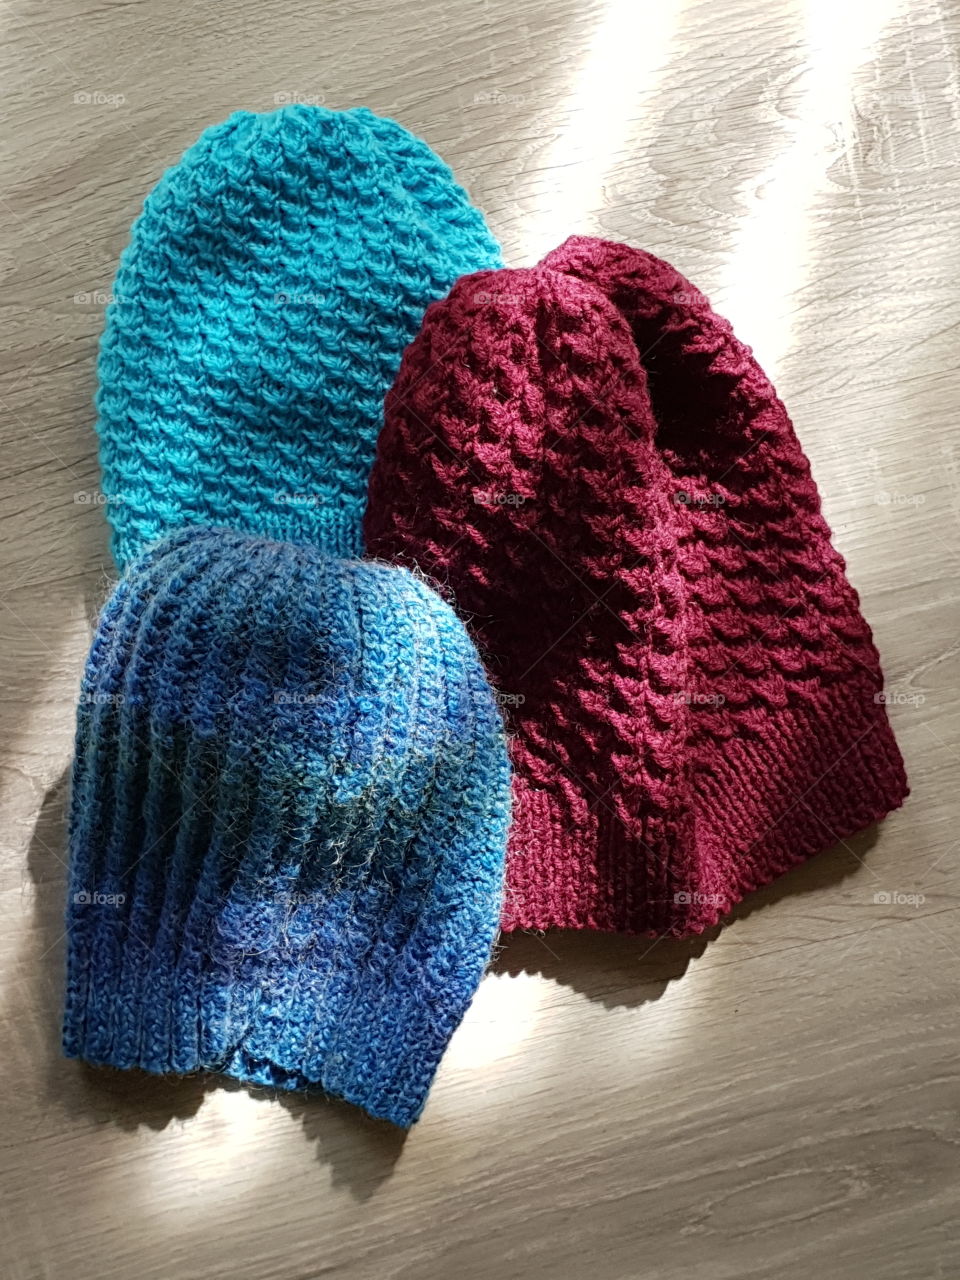 three knitted hats